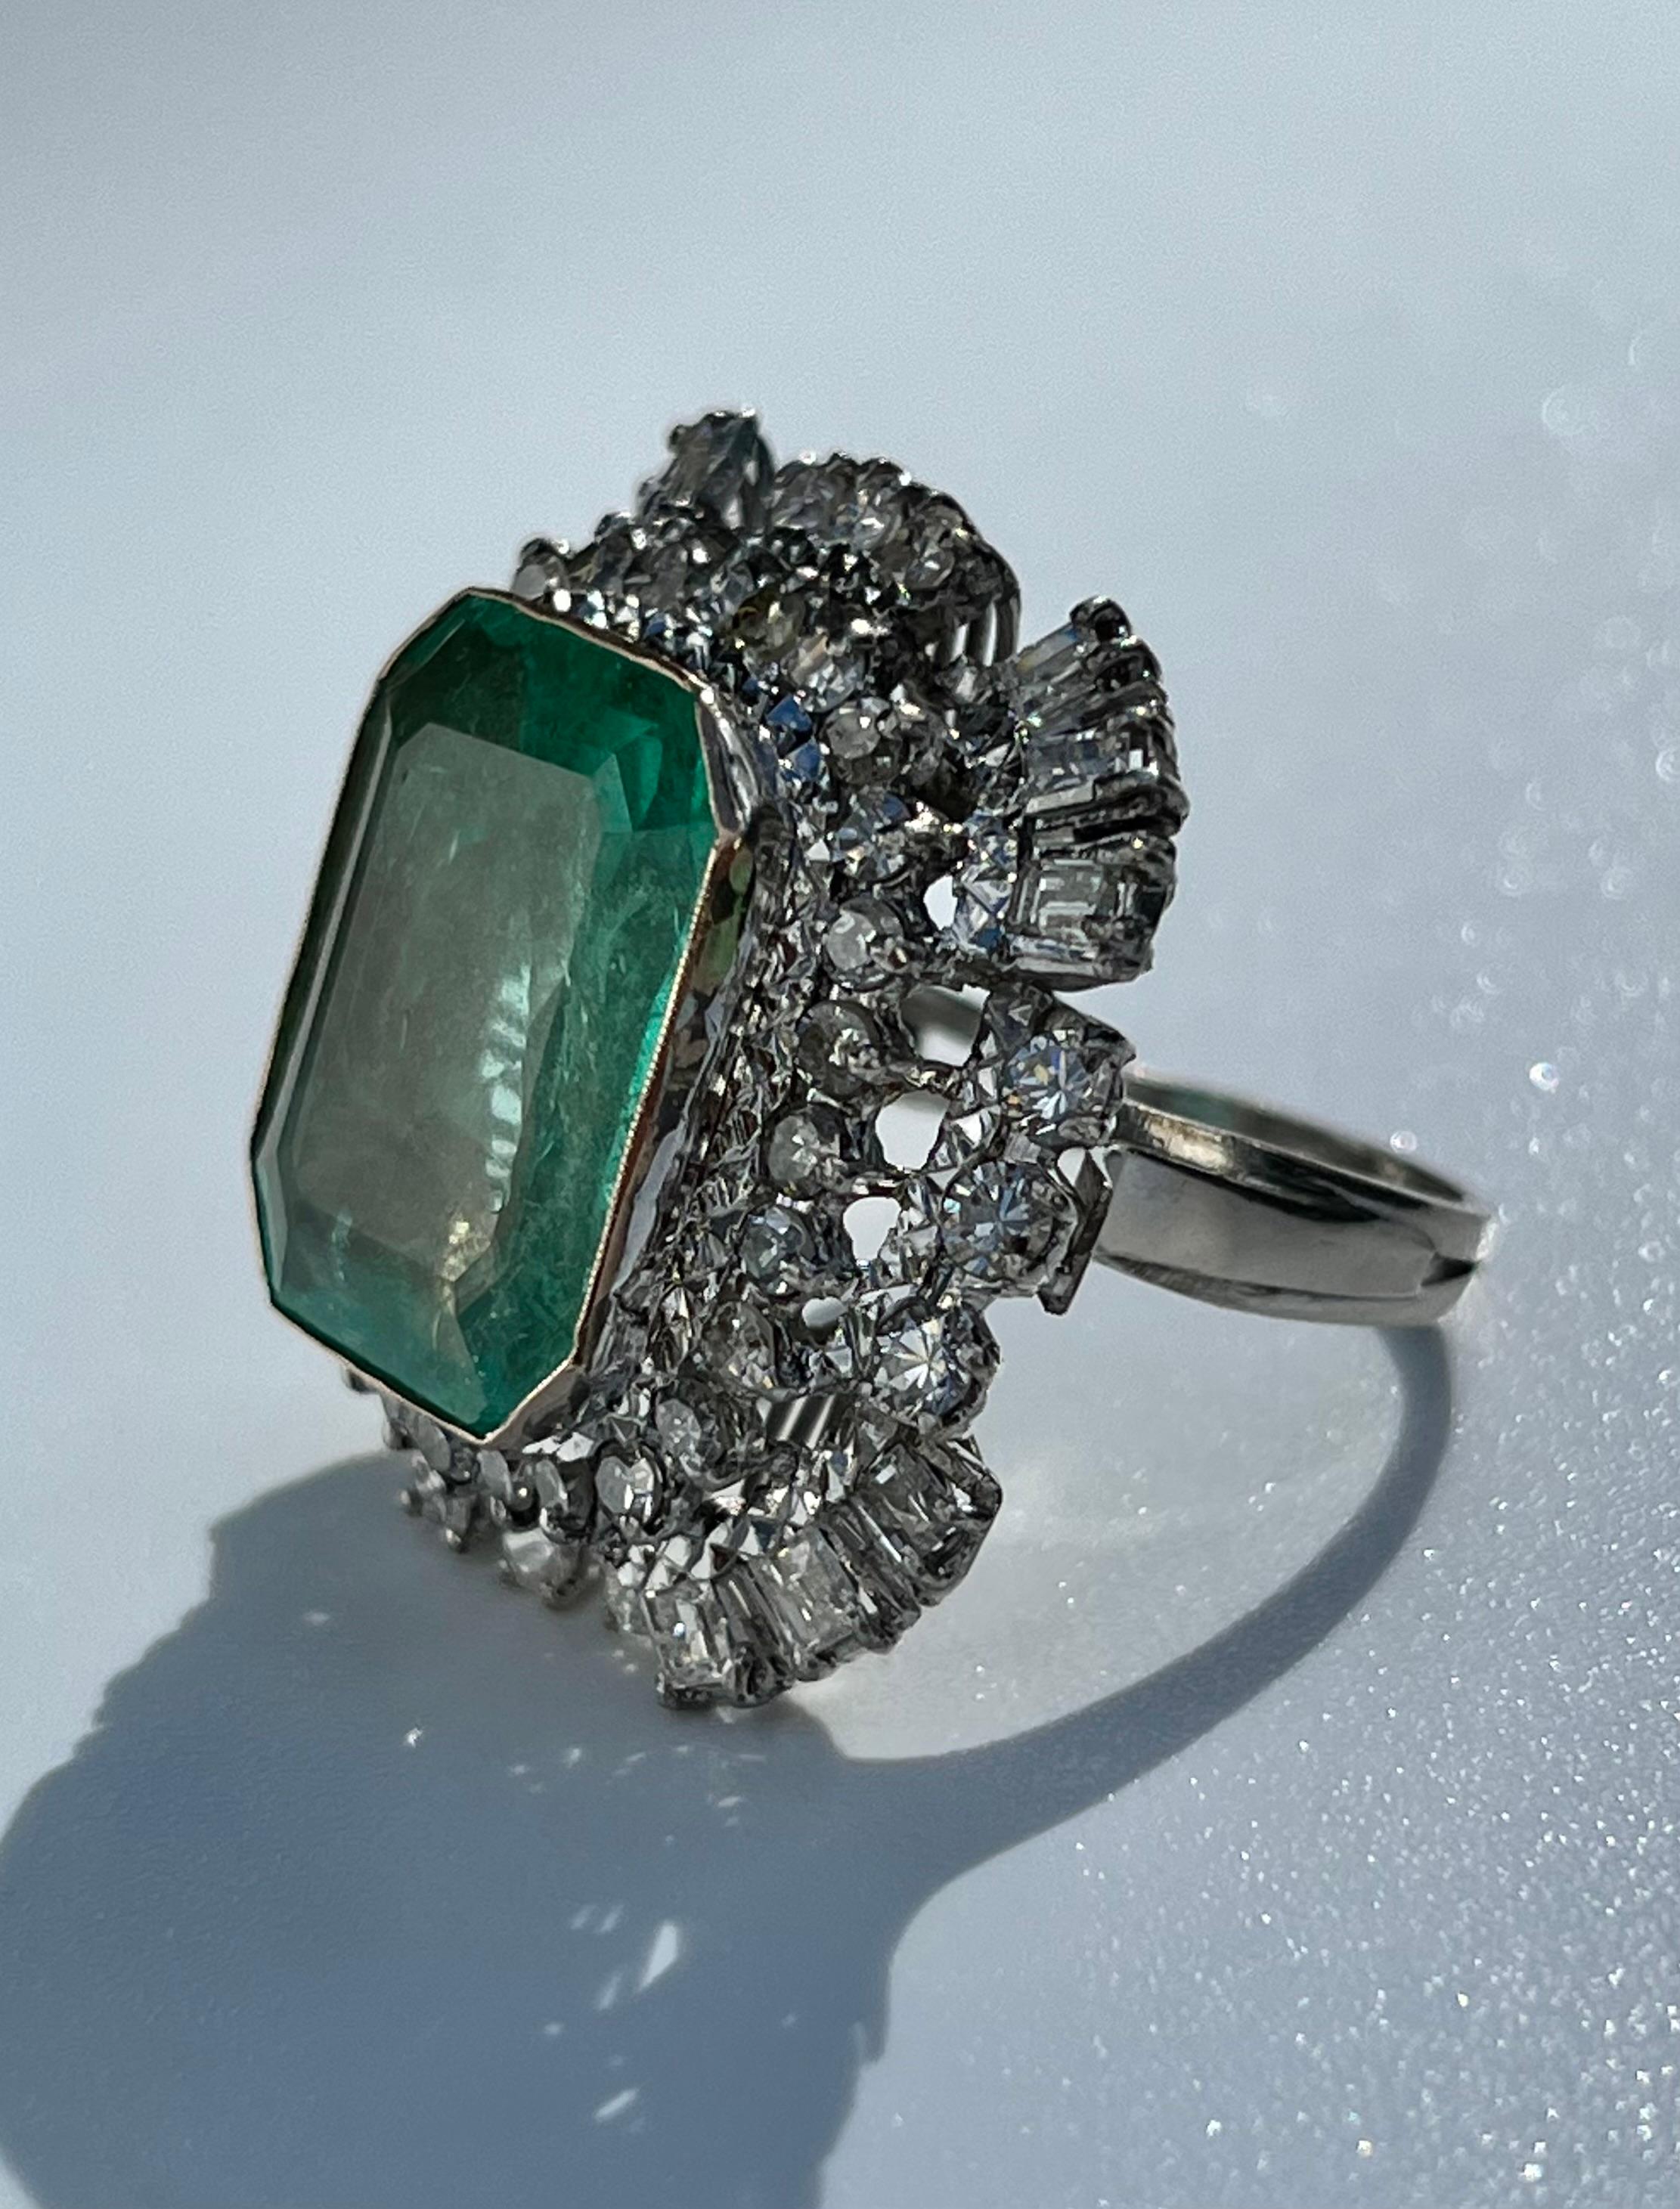 Vintage 12 Carat Colombian Emerald and Diamond Halo Ring Set in Palladium In Excellent Condition For Sale In Miami, FL